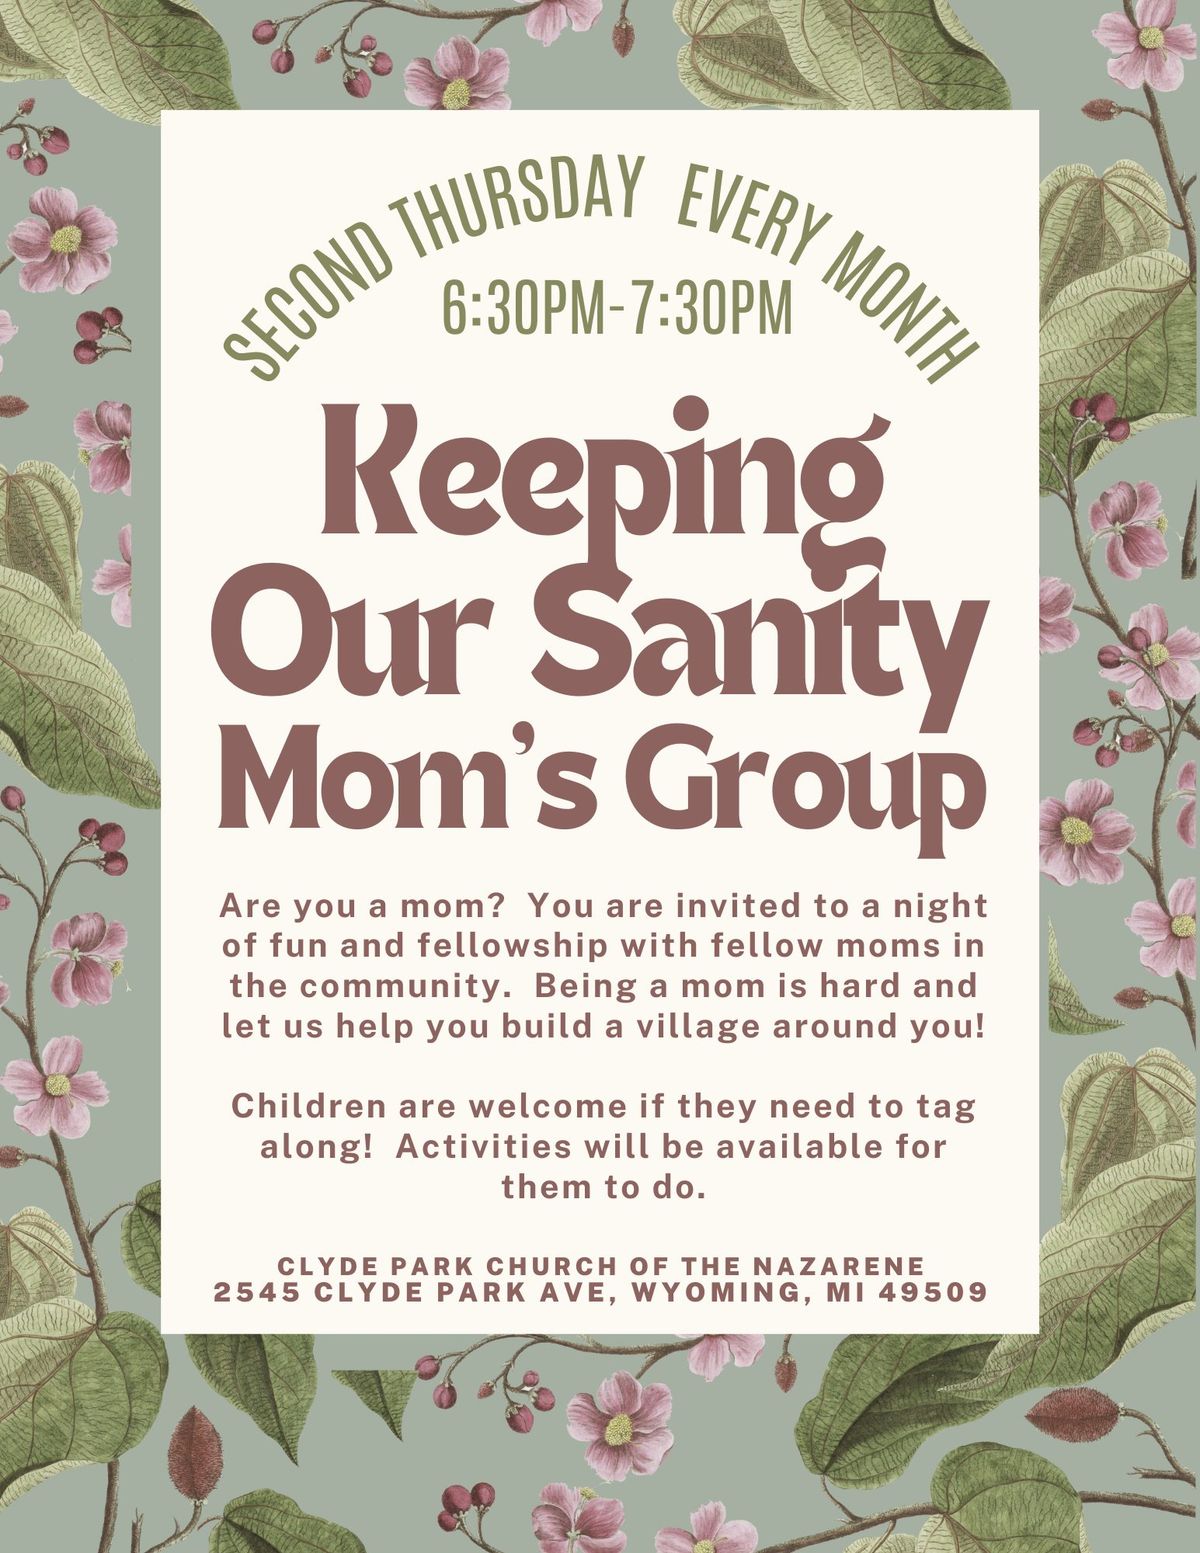 Keeping Our Sanity (Mom's Group)